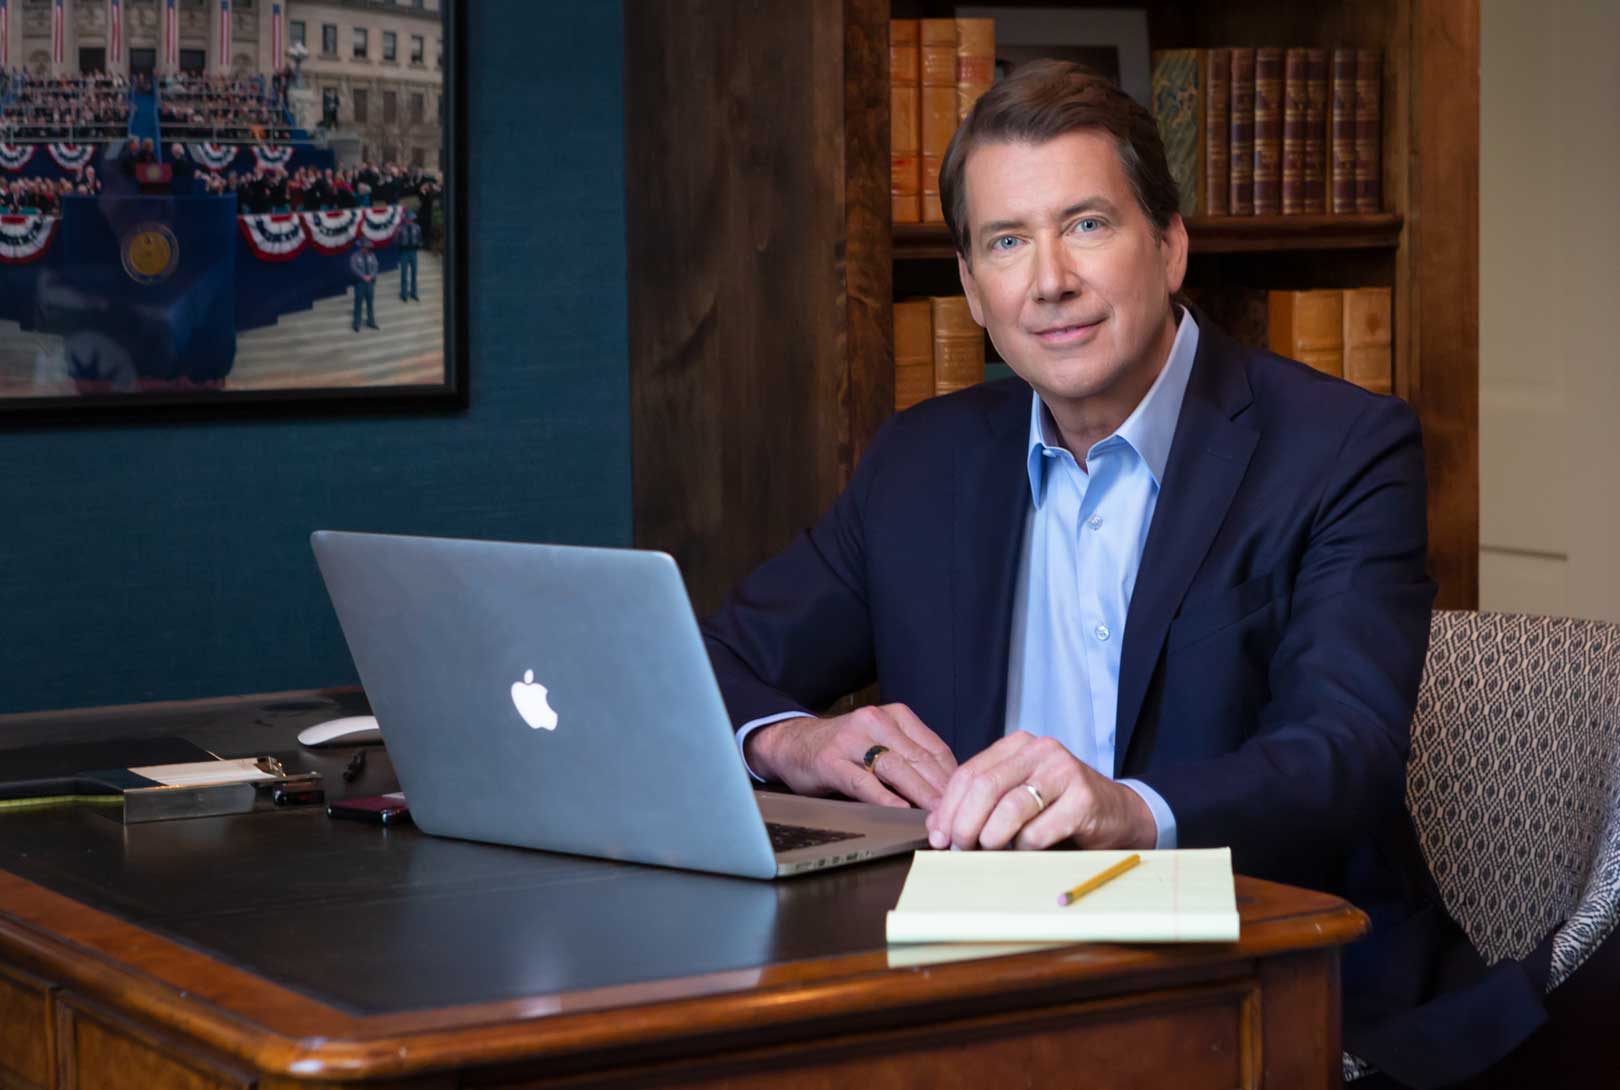 Campaign Photos Of Bill Hagerty In His Home Office